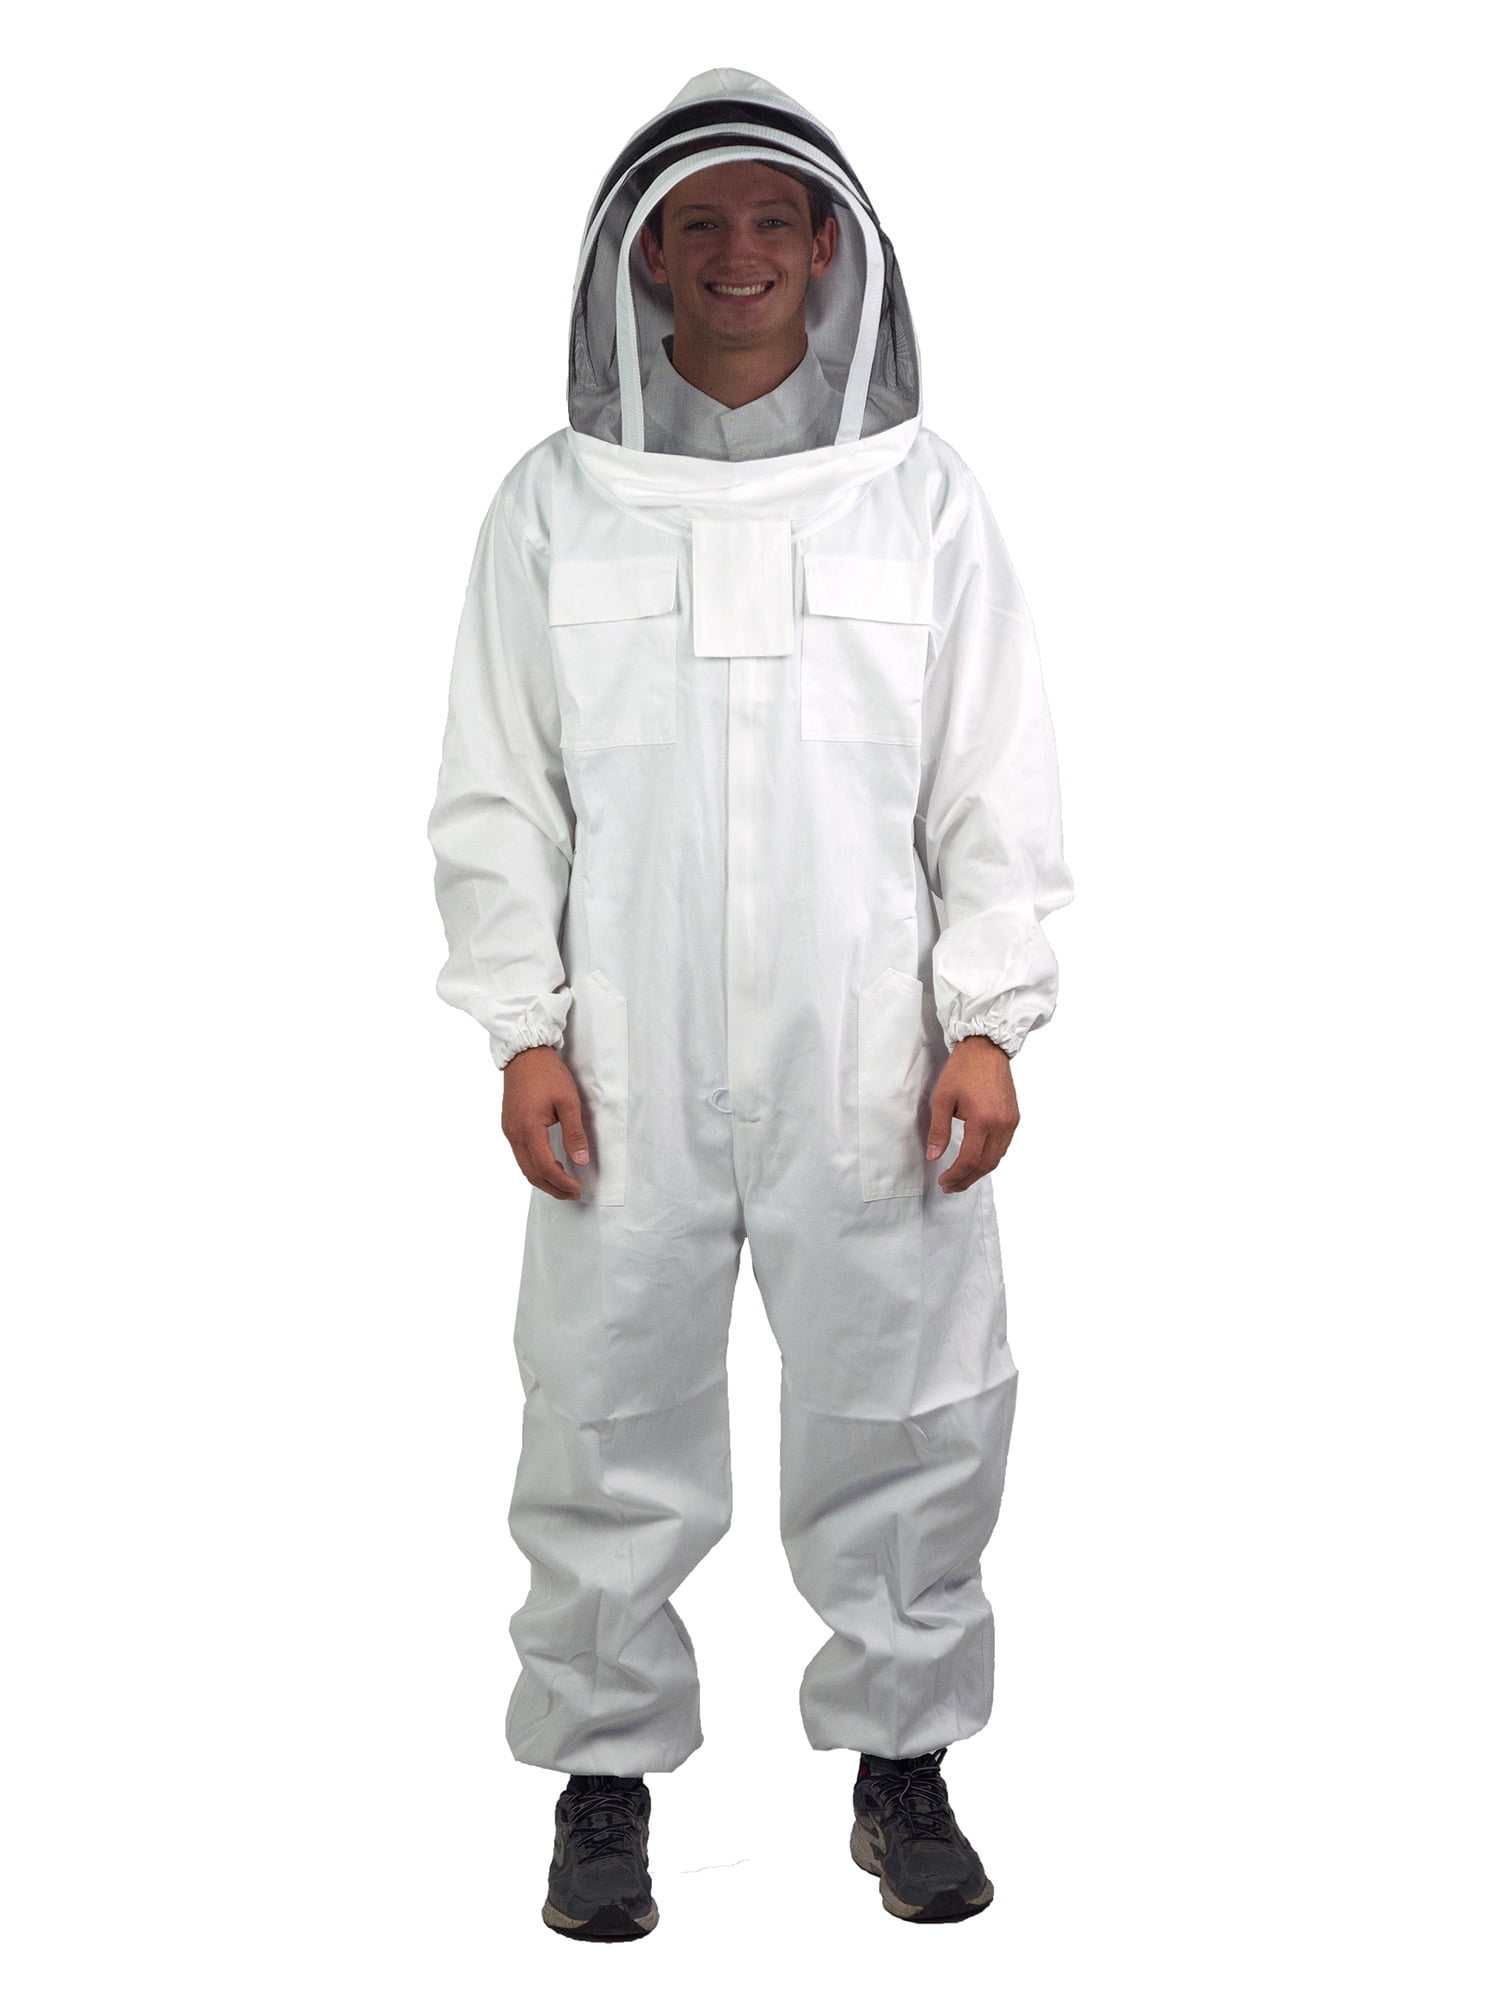 Bee Proof Full Body Suit Outfit Glove Veil Hood for Beekeepers XL 